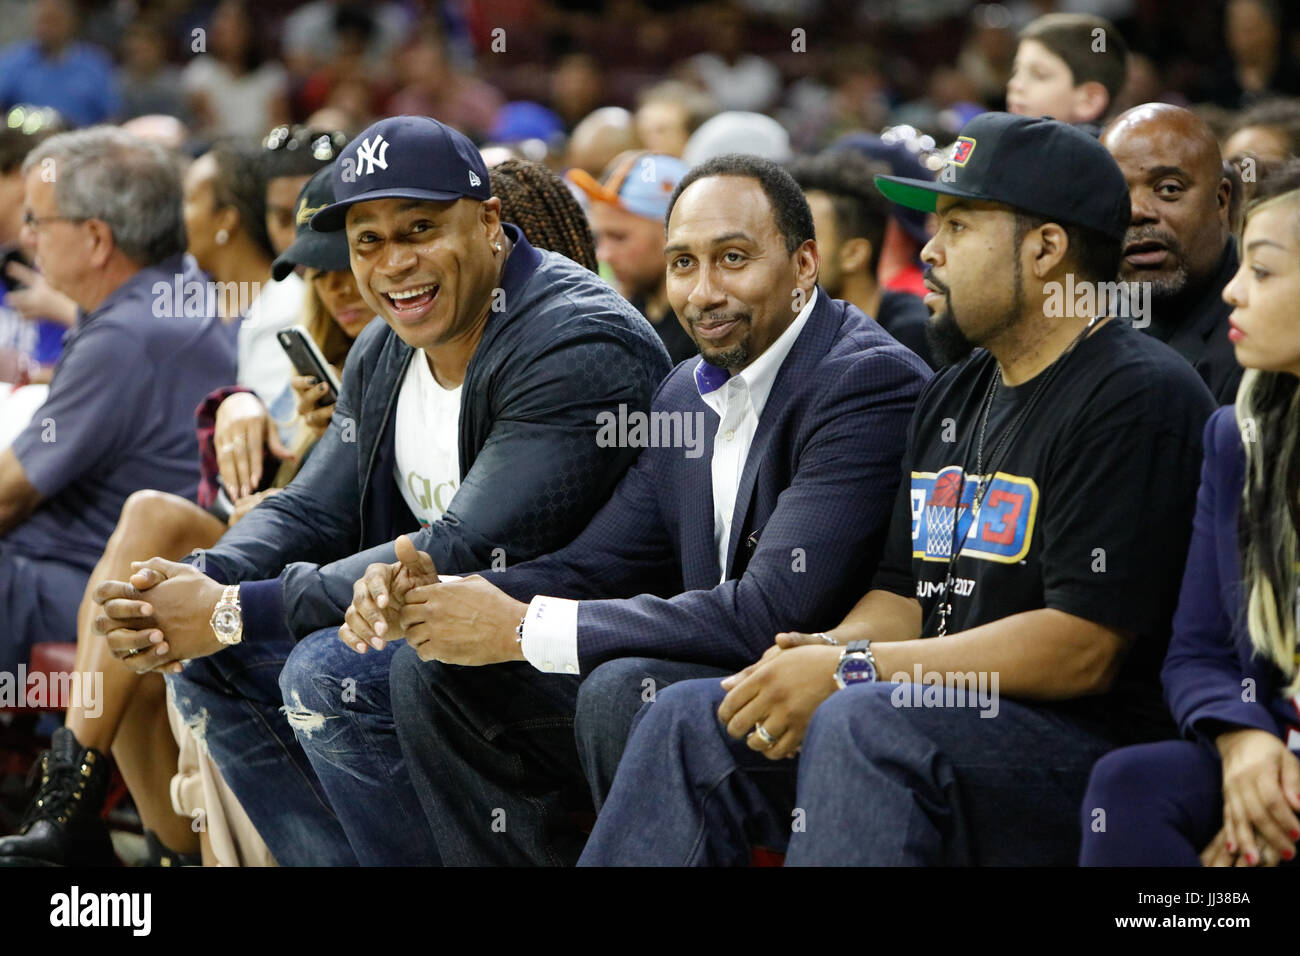 LL Cool J,Steven A. Smith Ice Cube attend Big 3 league Phiily,PA 7/16/17 Stock Photo